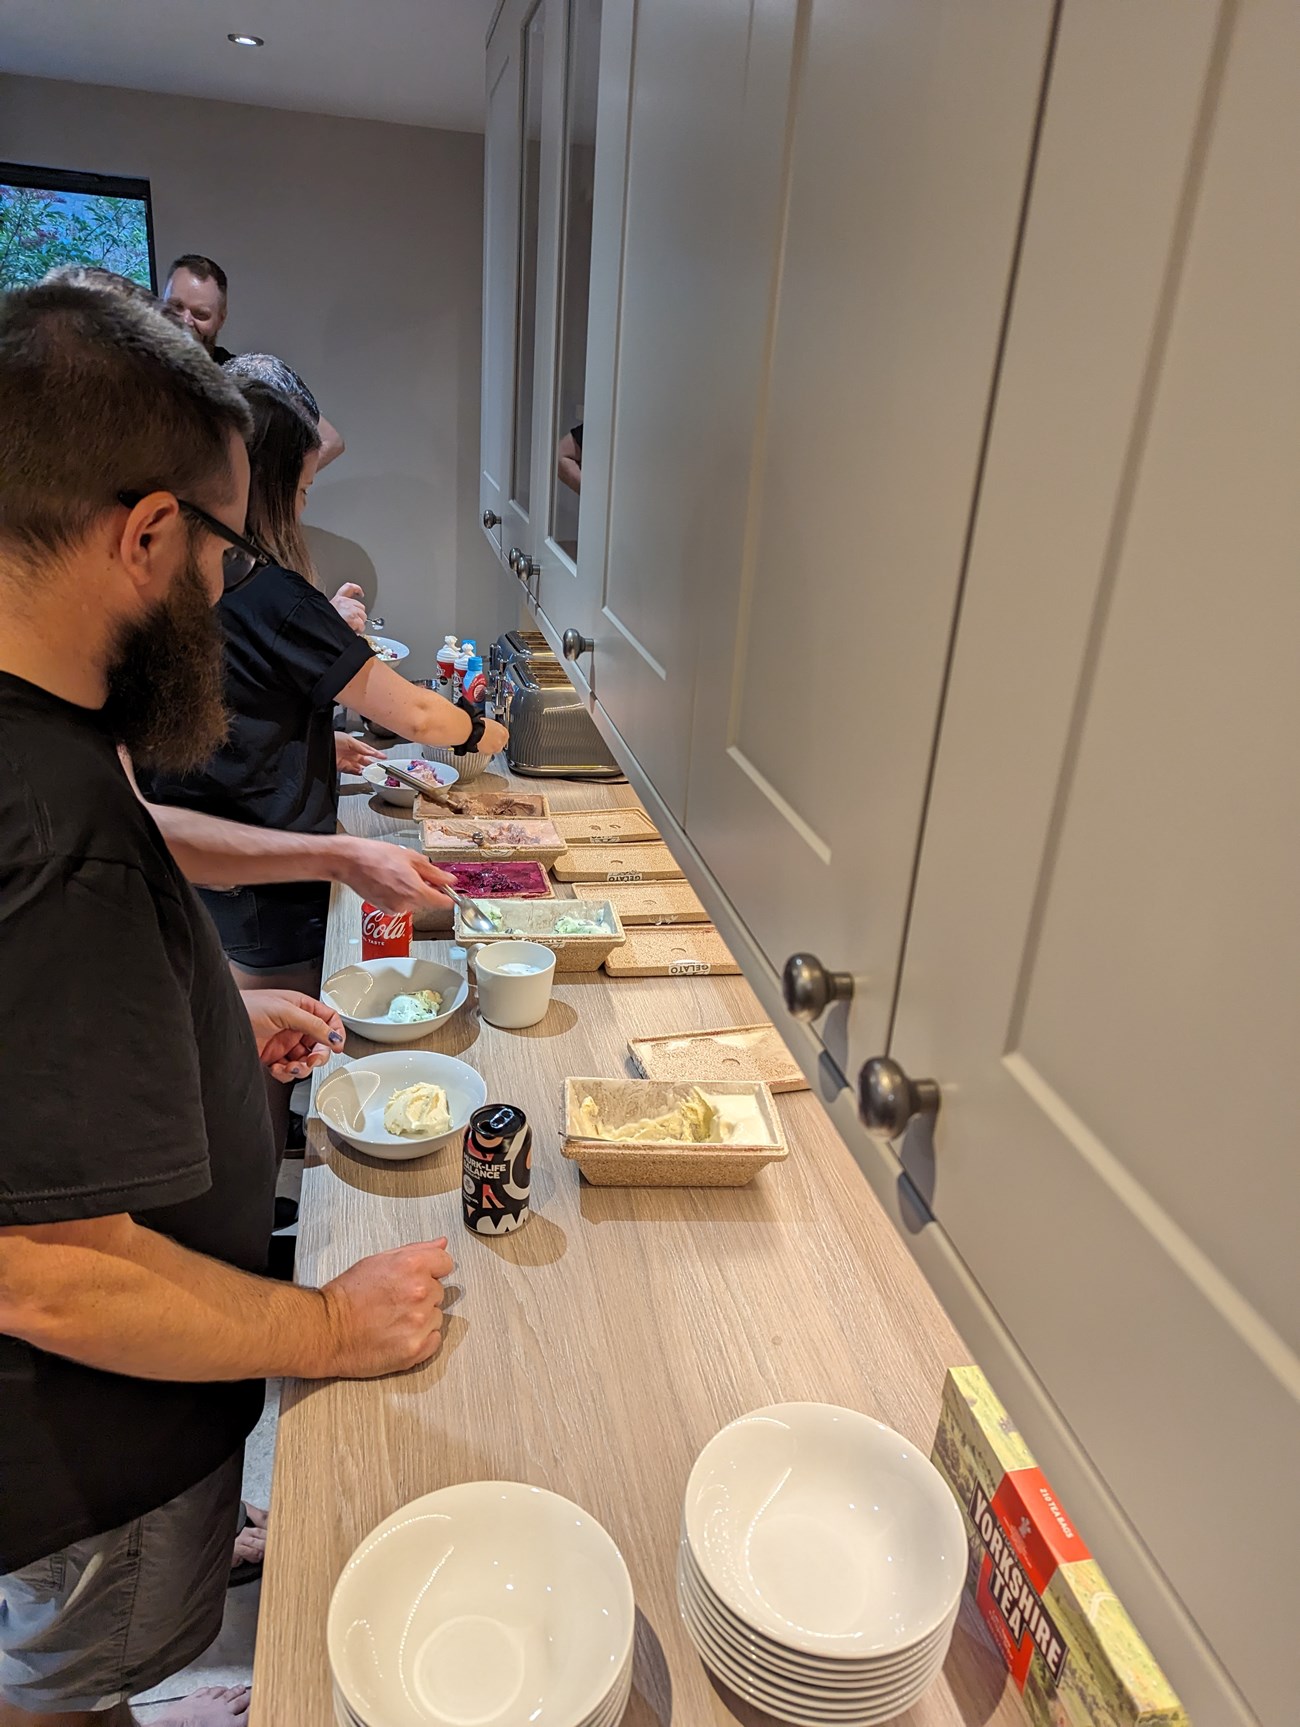 Joe queueing up to get his bowl of delicious gelato in the CODECABIN kitchen. There are 5 ice cream flavours to choose from and Joe already has one scoop in his bowl!